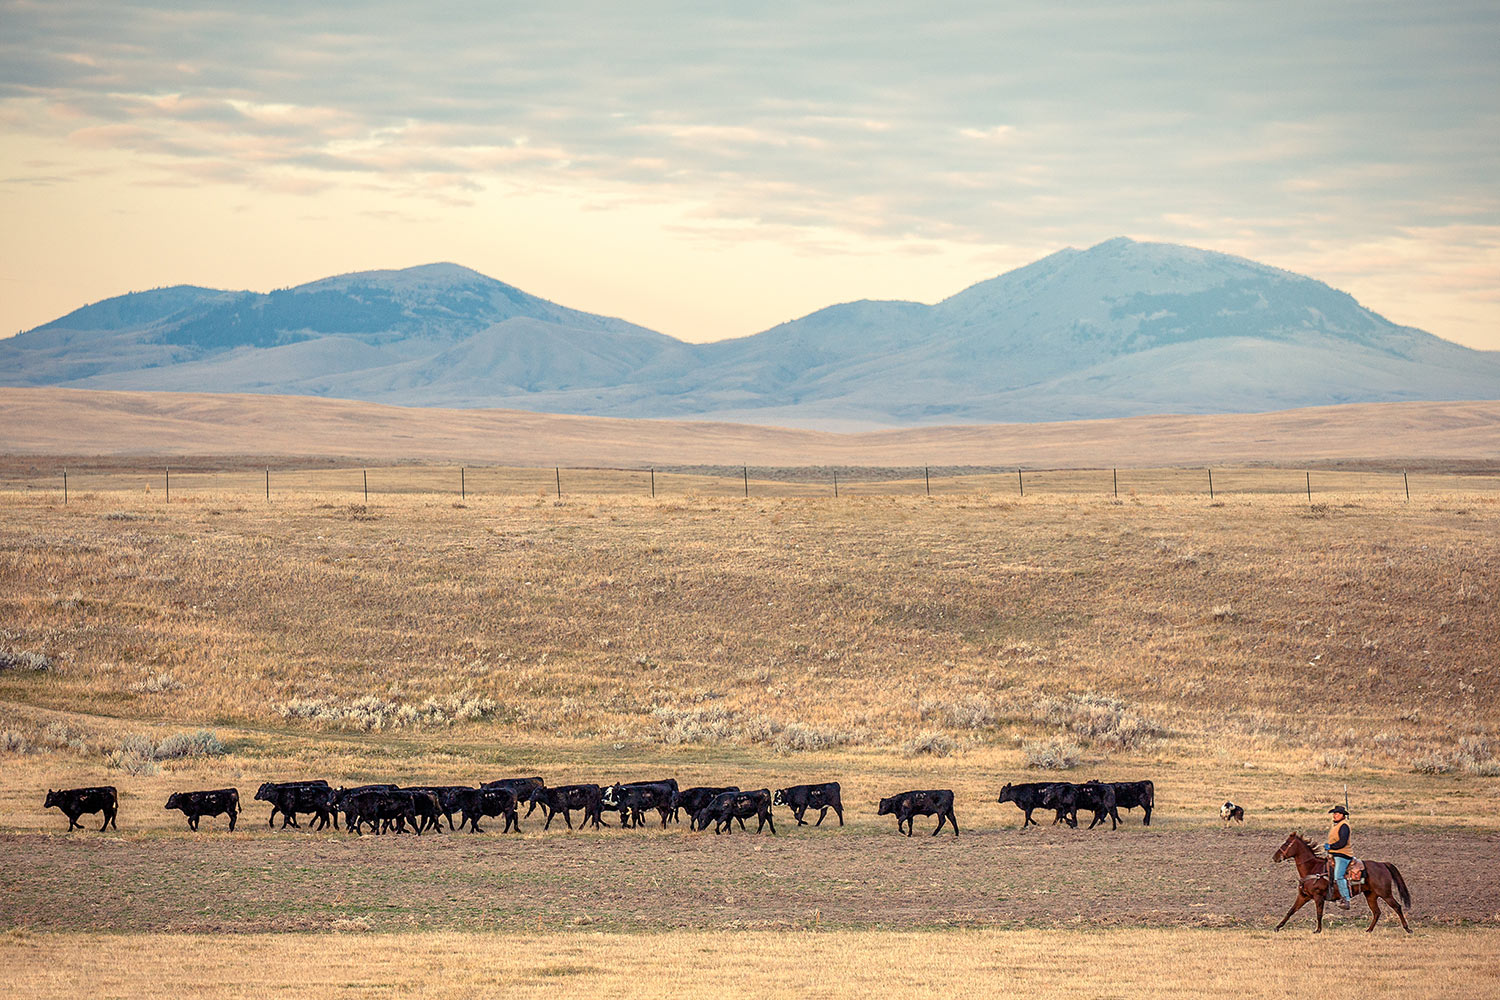 Stephen Fox, of Hays, Montana, who is a native American from the Kainai tribe, rounds up cattle in the shadow of the Bear Paw Mountains on his ranch. → Buy a Print or License Photo